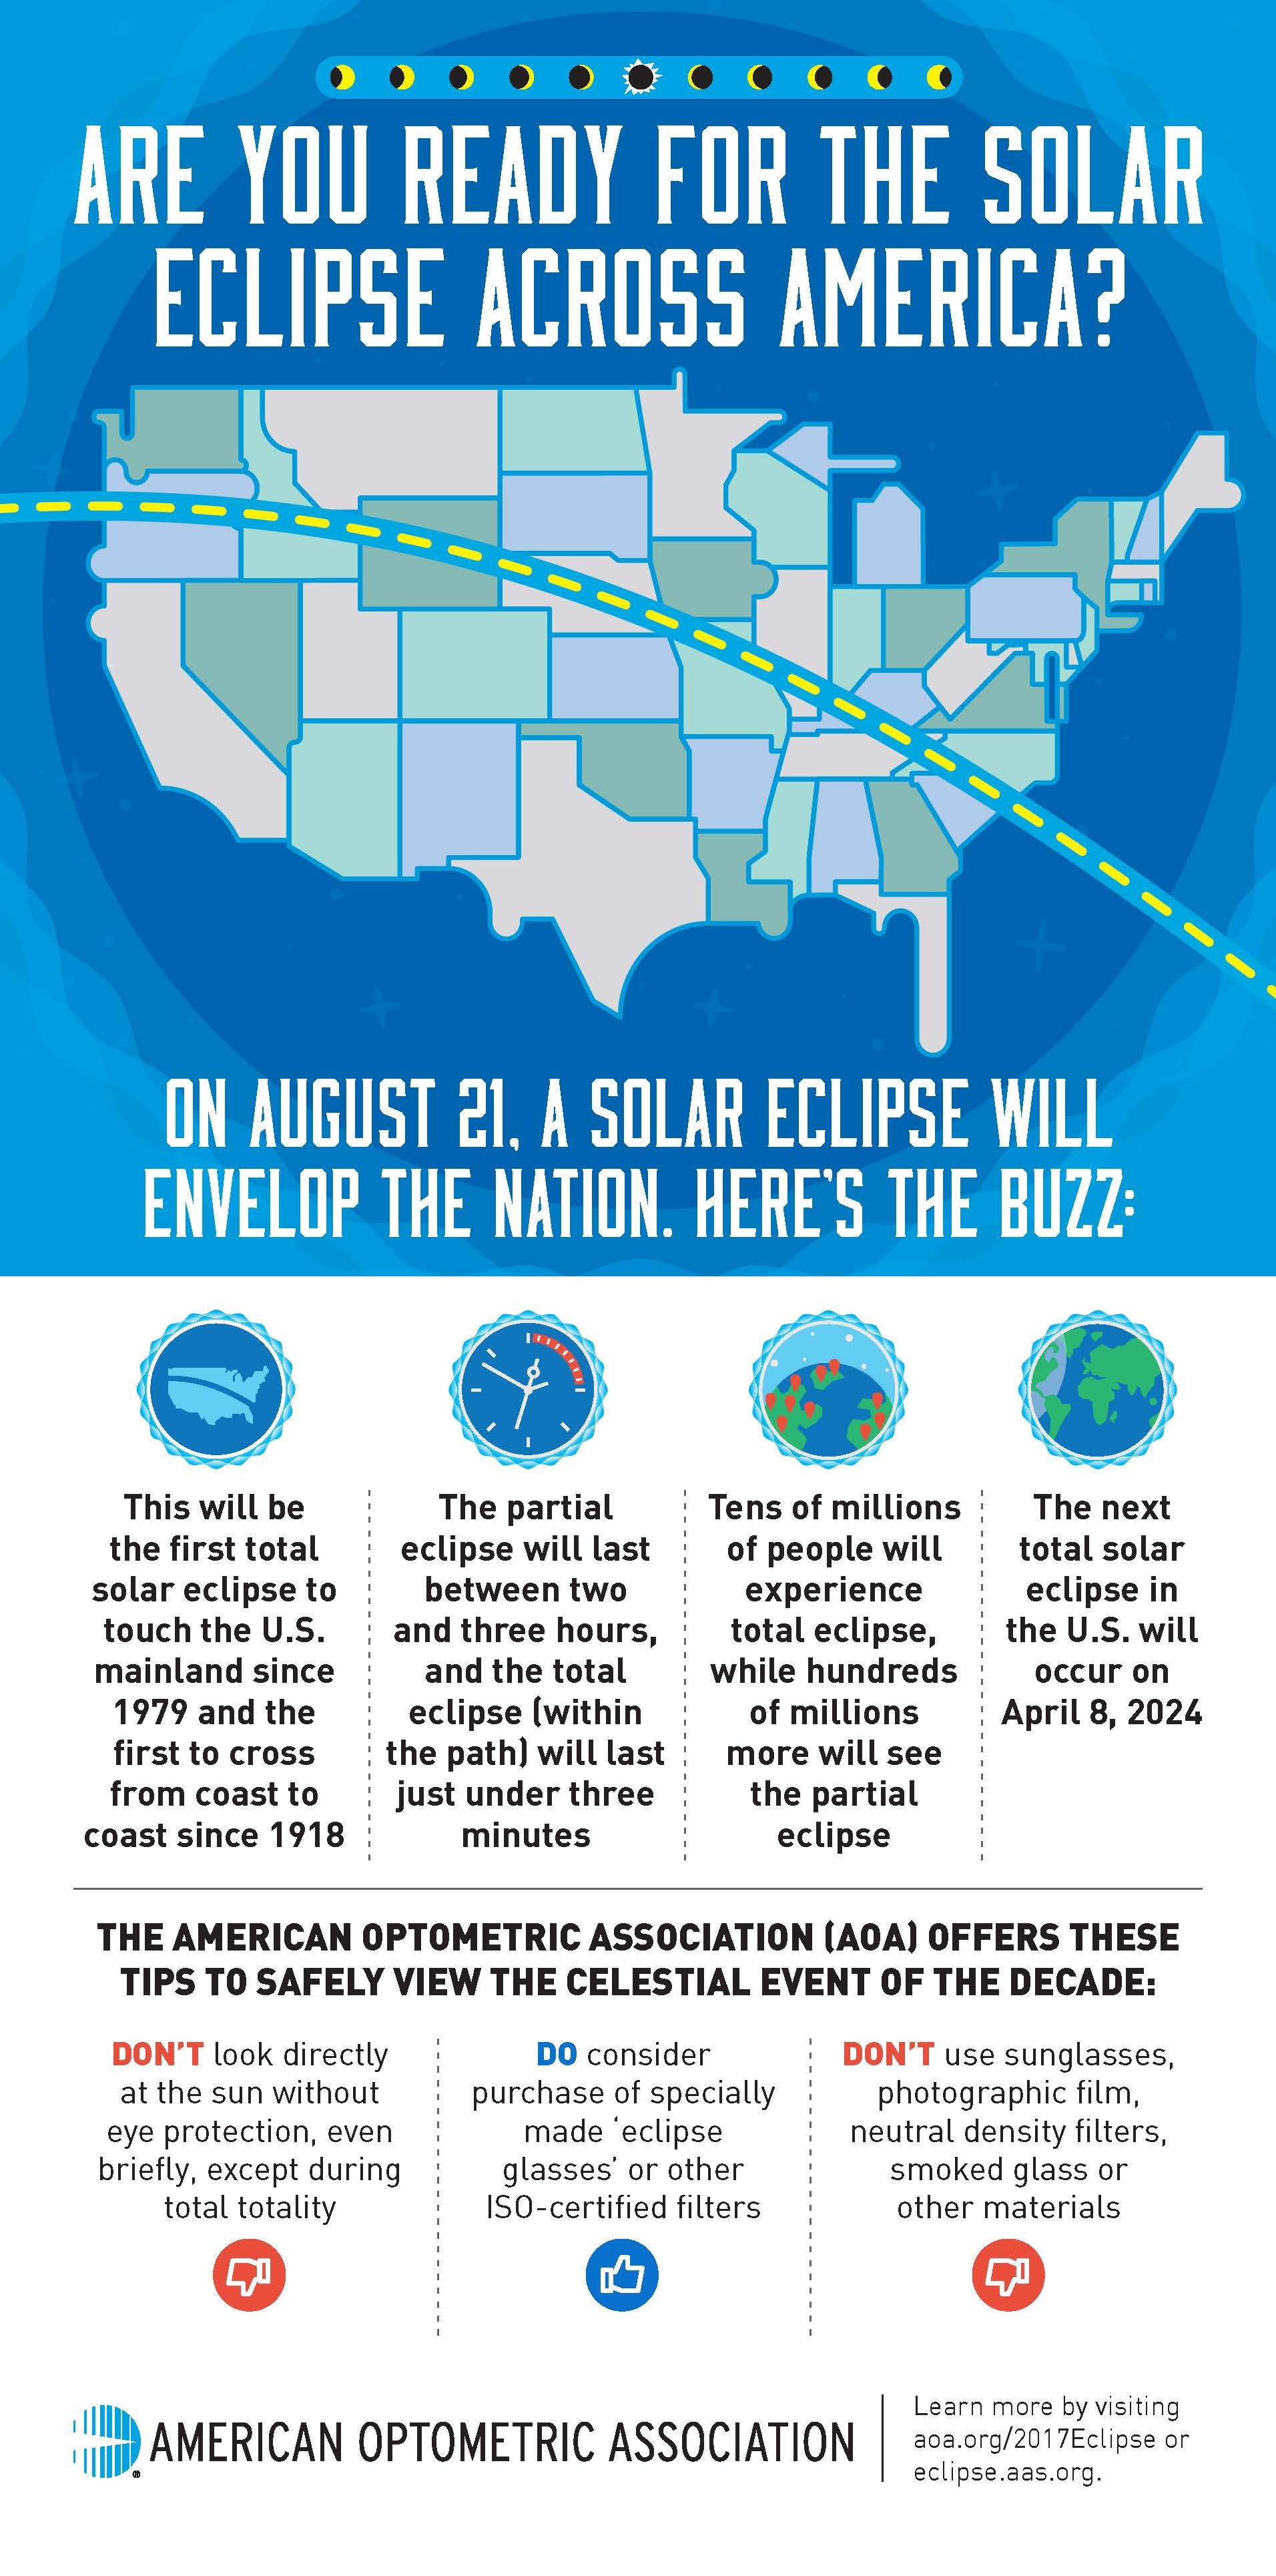 Historic solar eclipse comes with dangers Article The United States